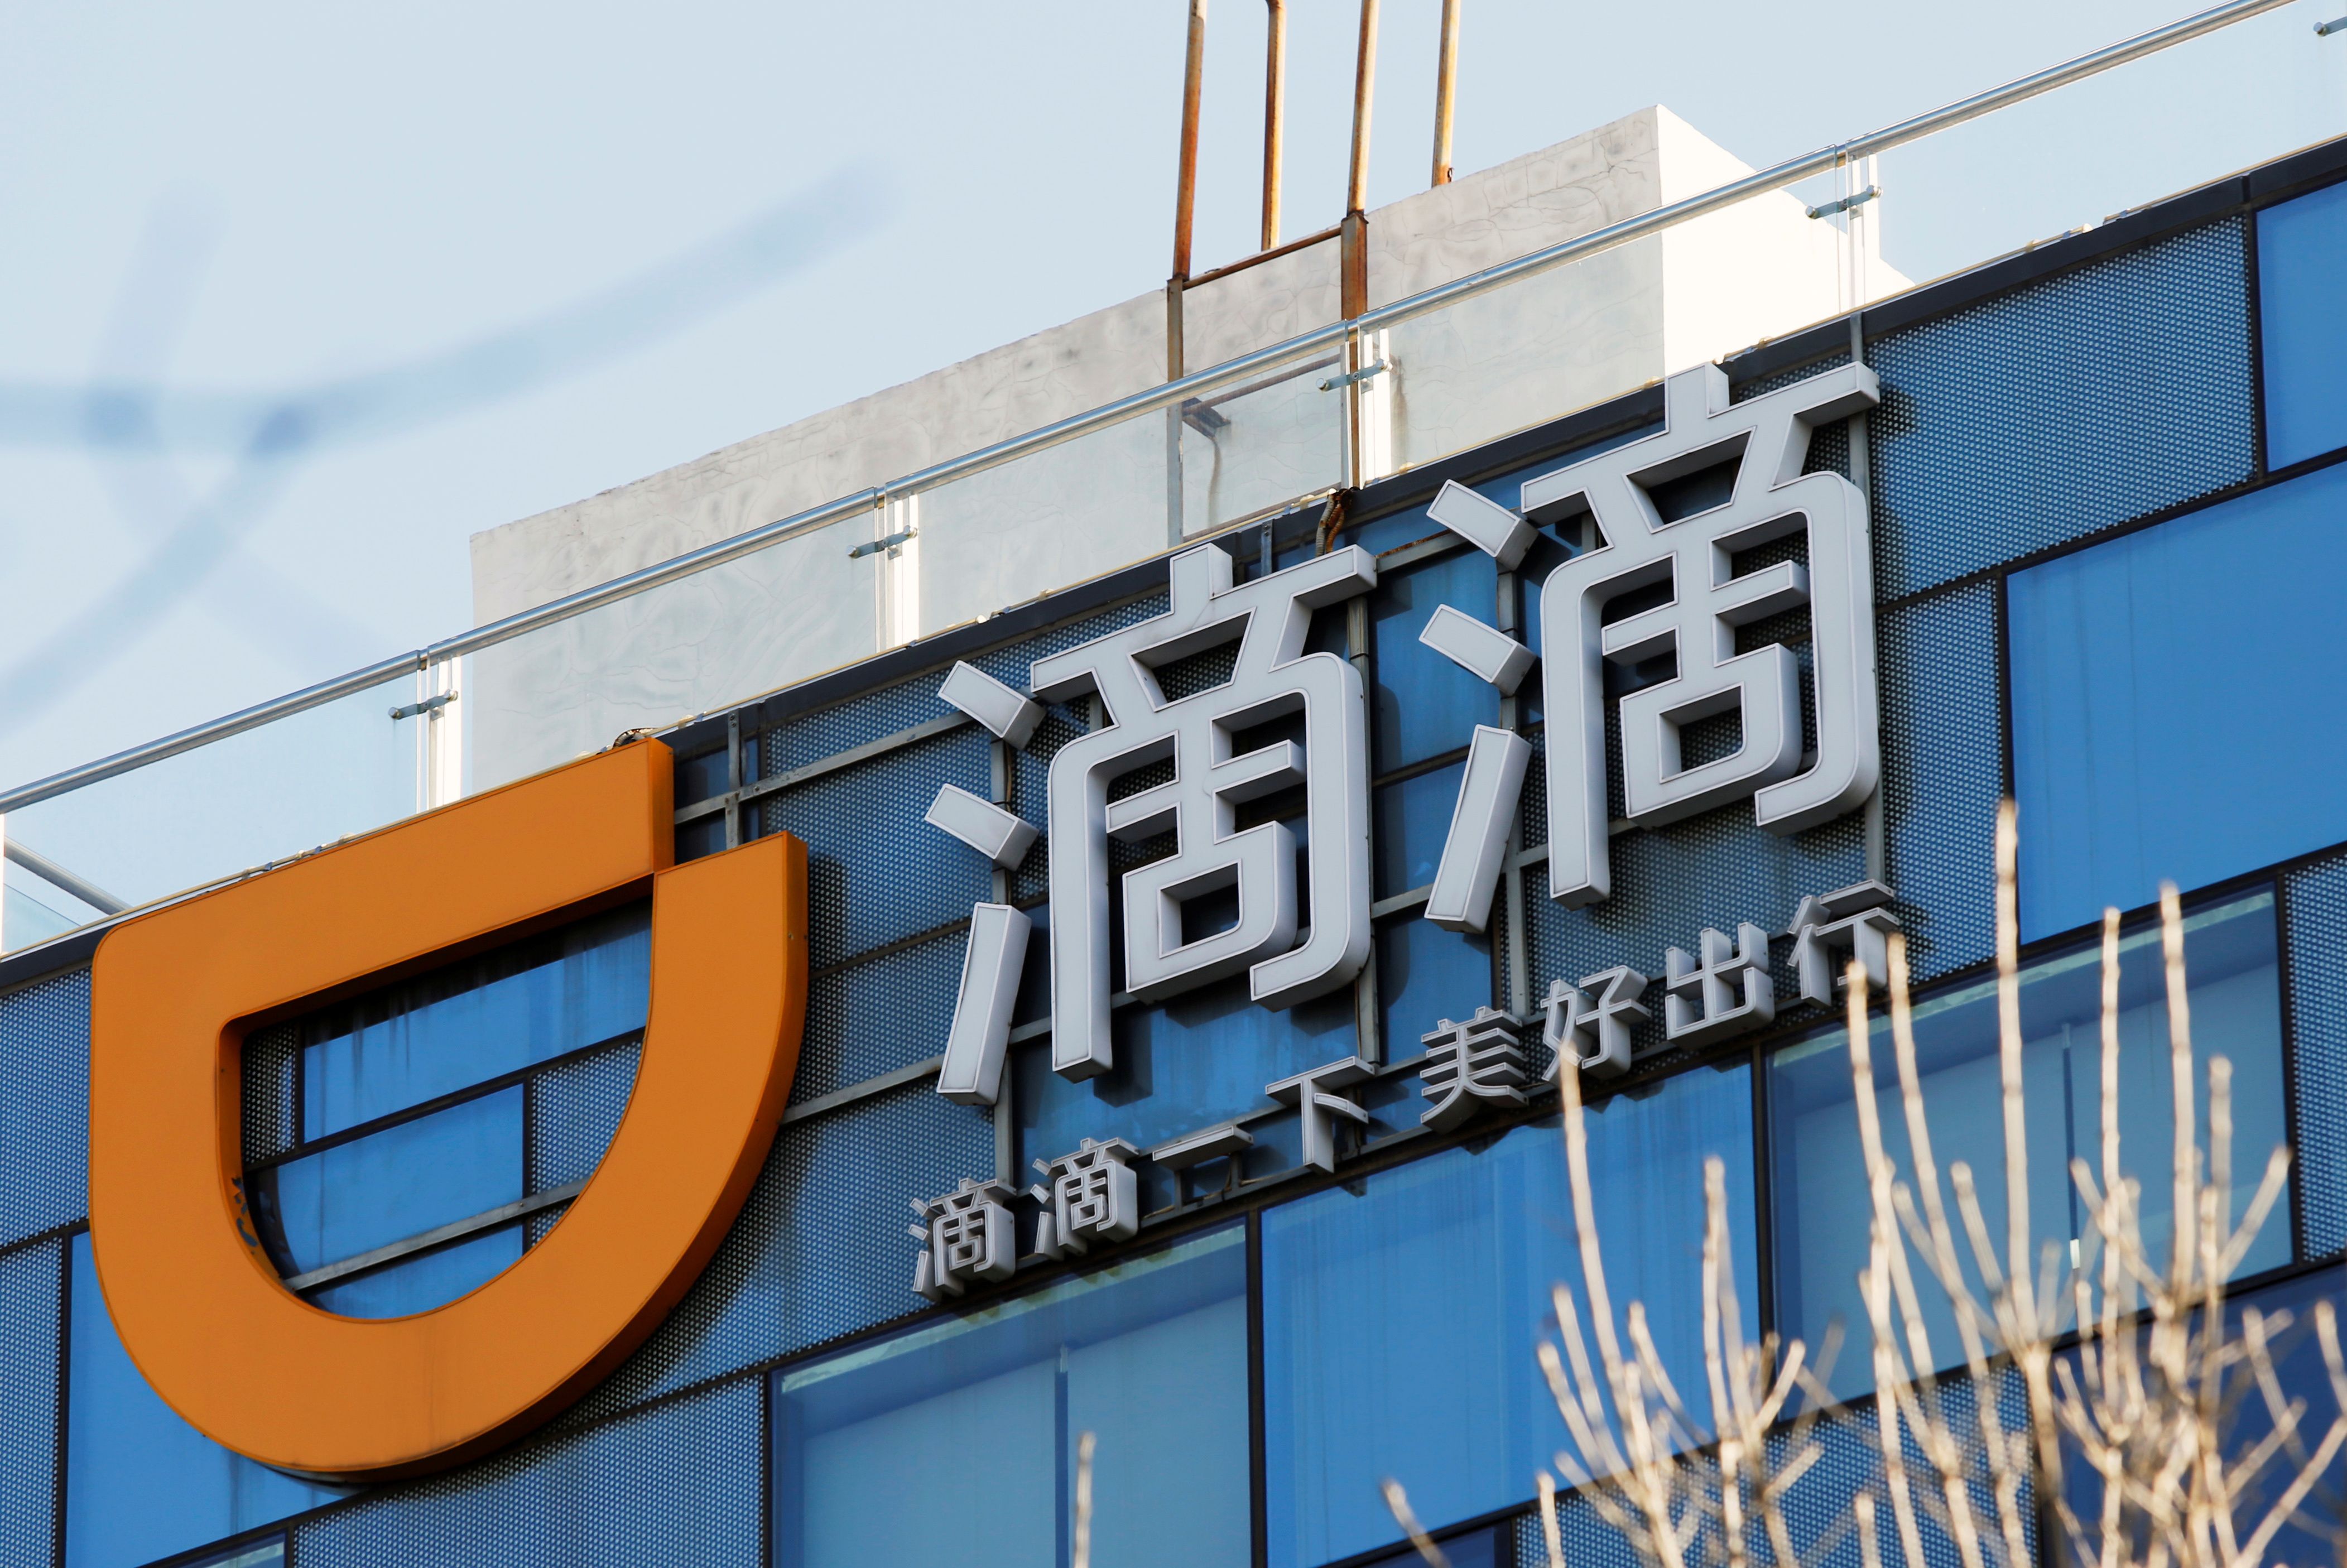 FILE PHOTO: A Didi logo is seen at the headquarters of Didi Chuxing in Beijing, China November 20, 2020. REUTERS/Florence Lo